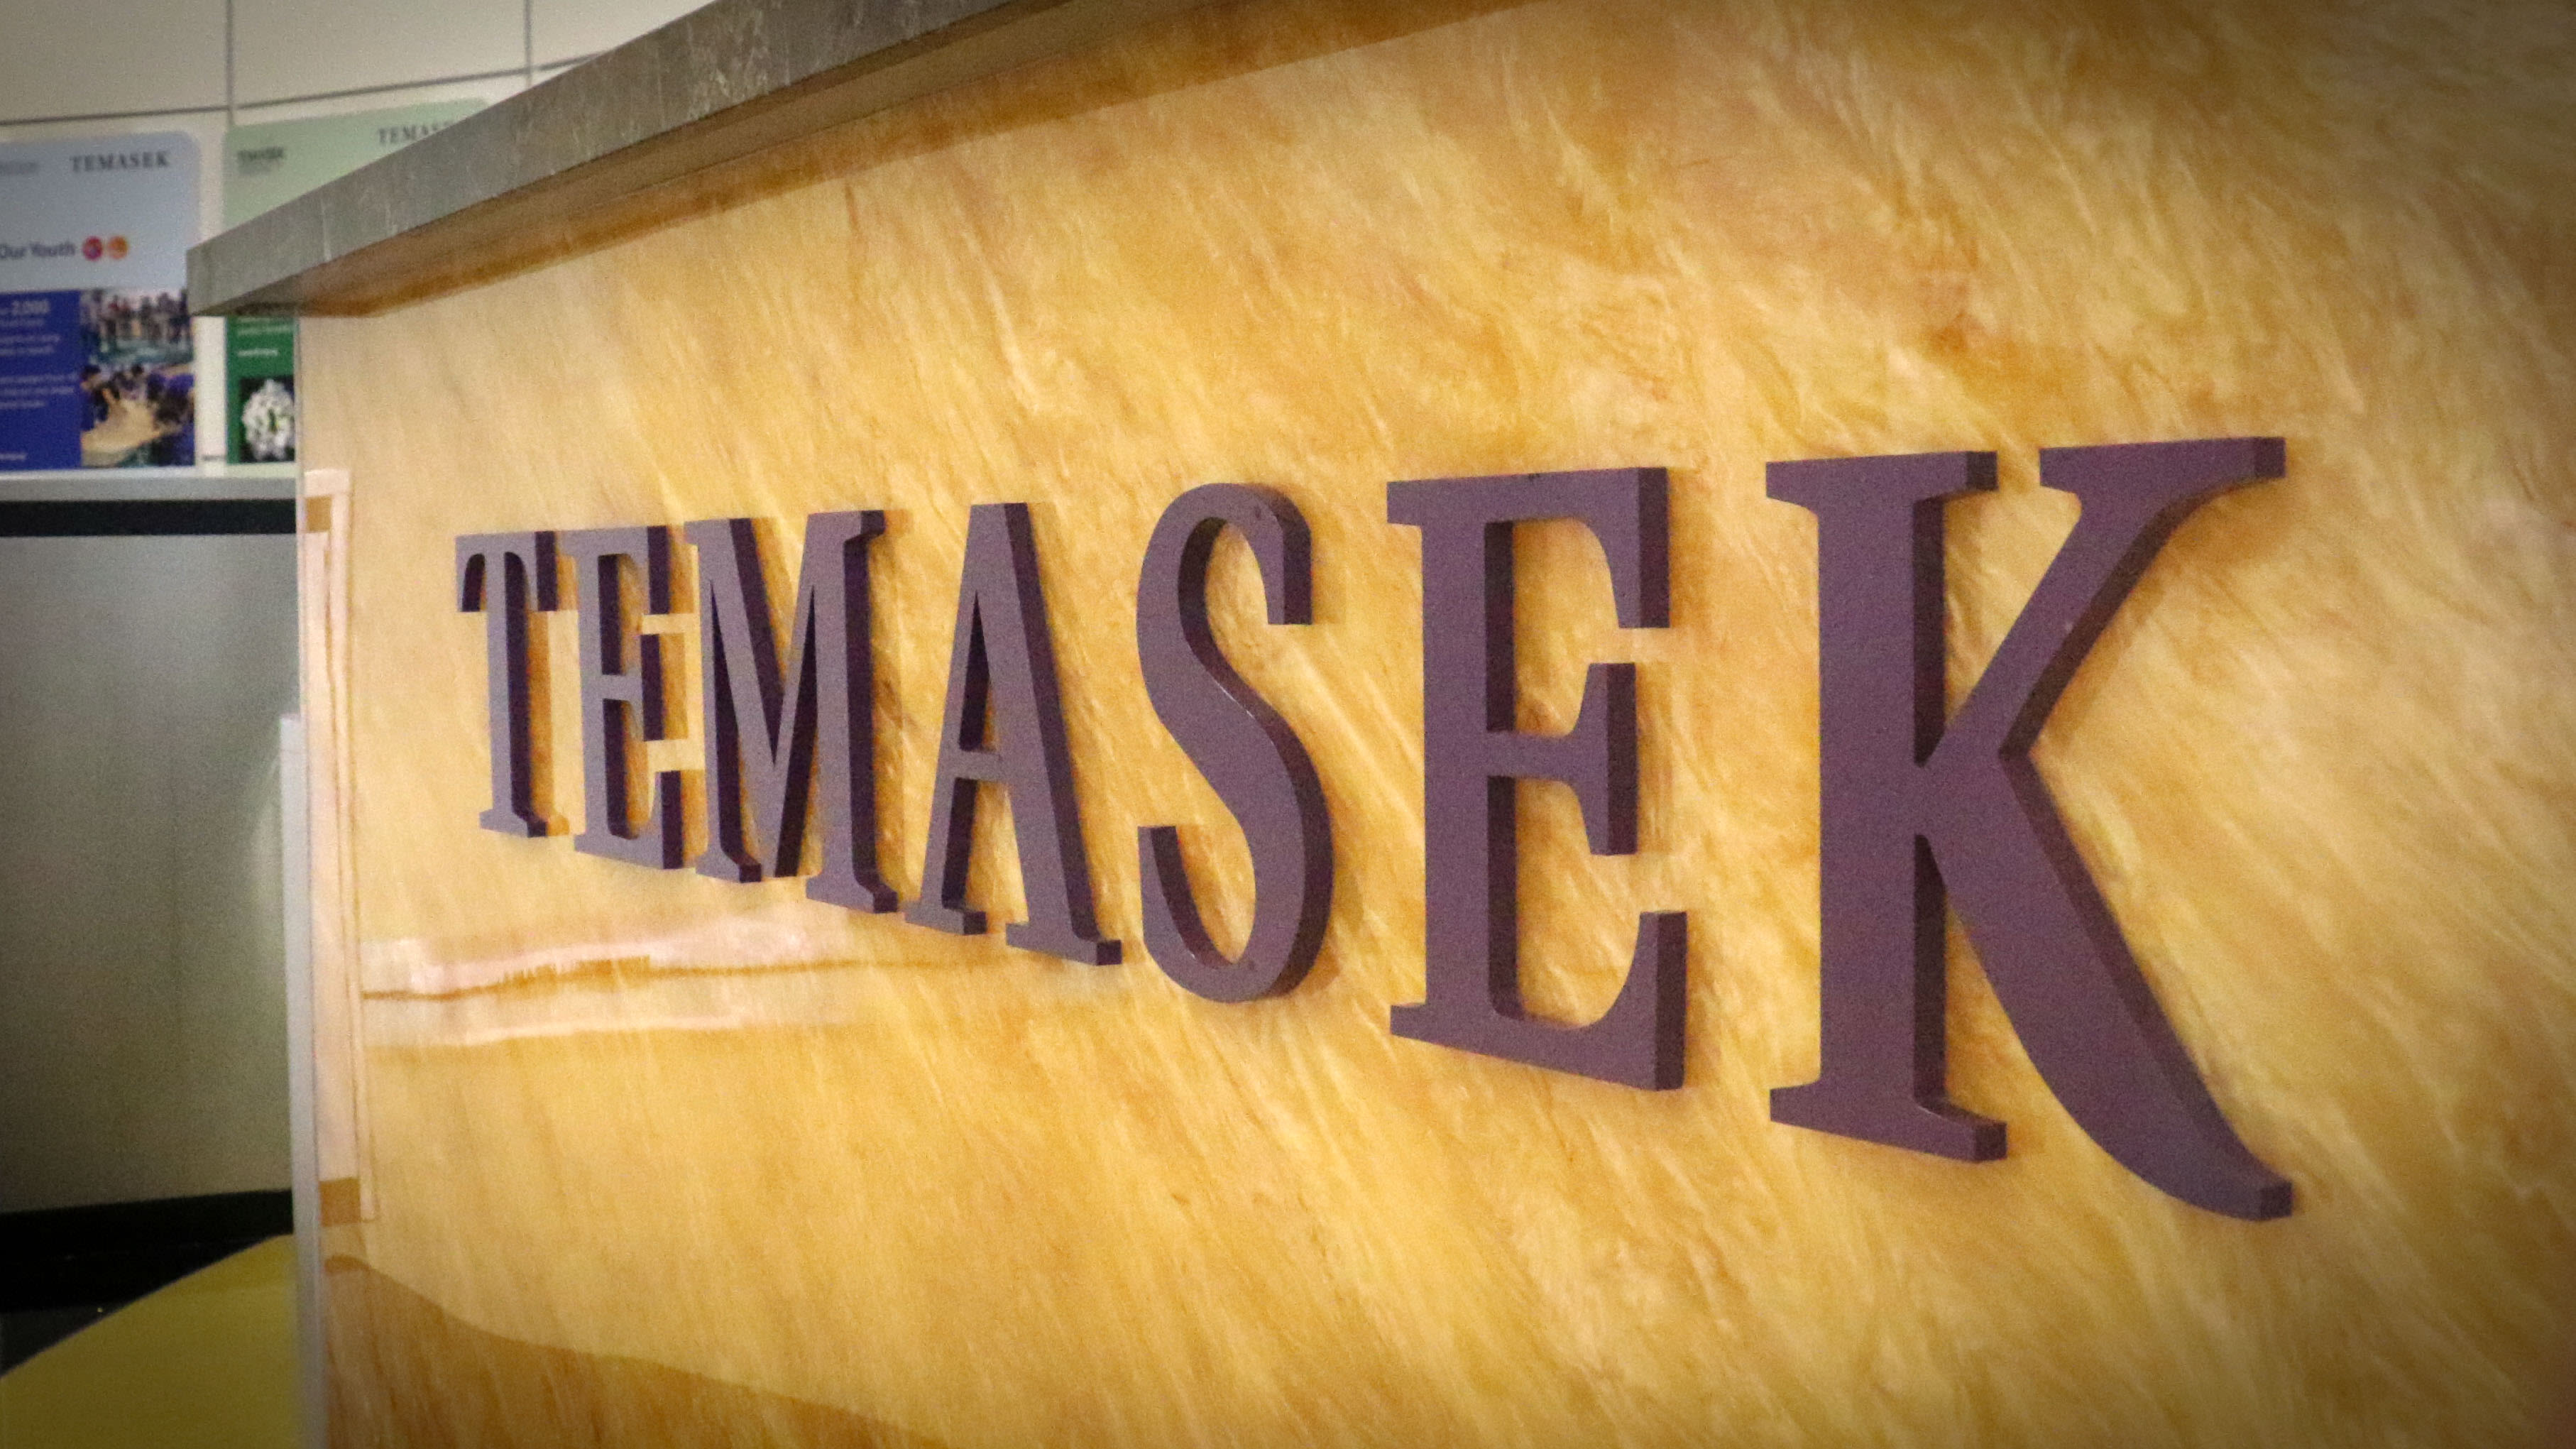 Singapore's Temasek plans to invest up to $30bn in U.S. over next 5 years